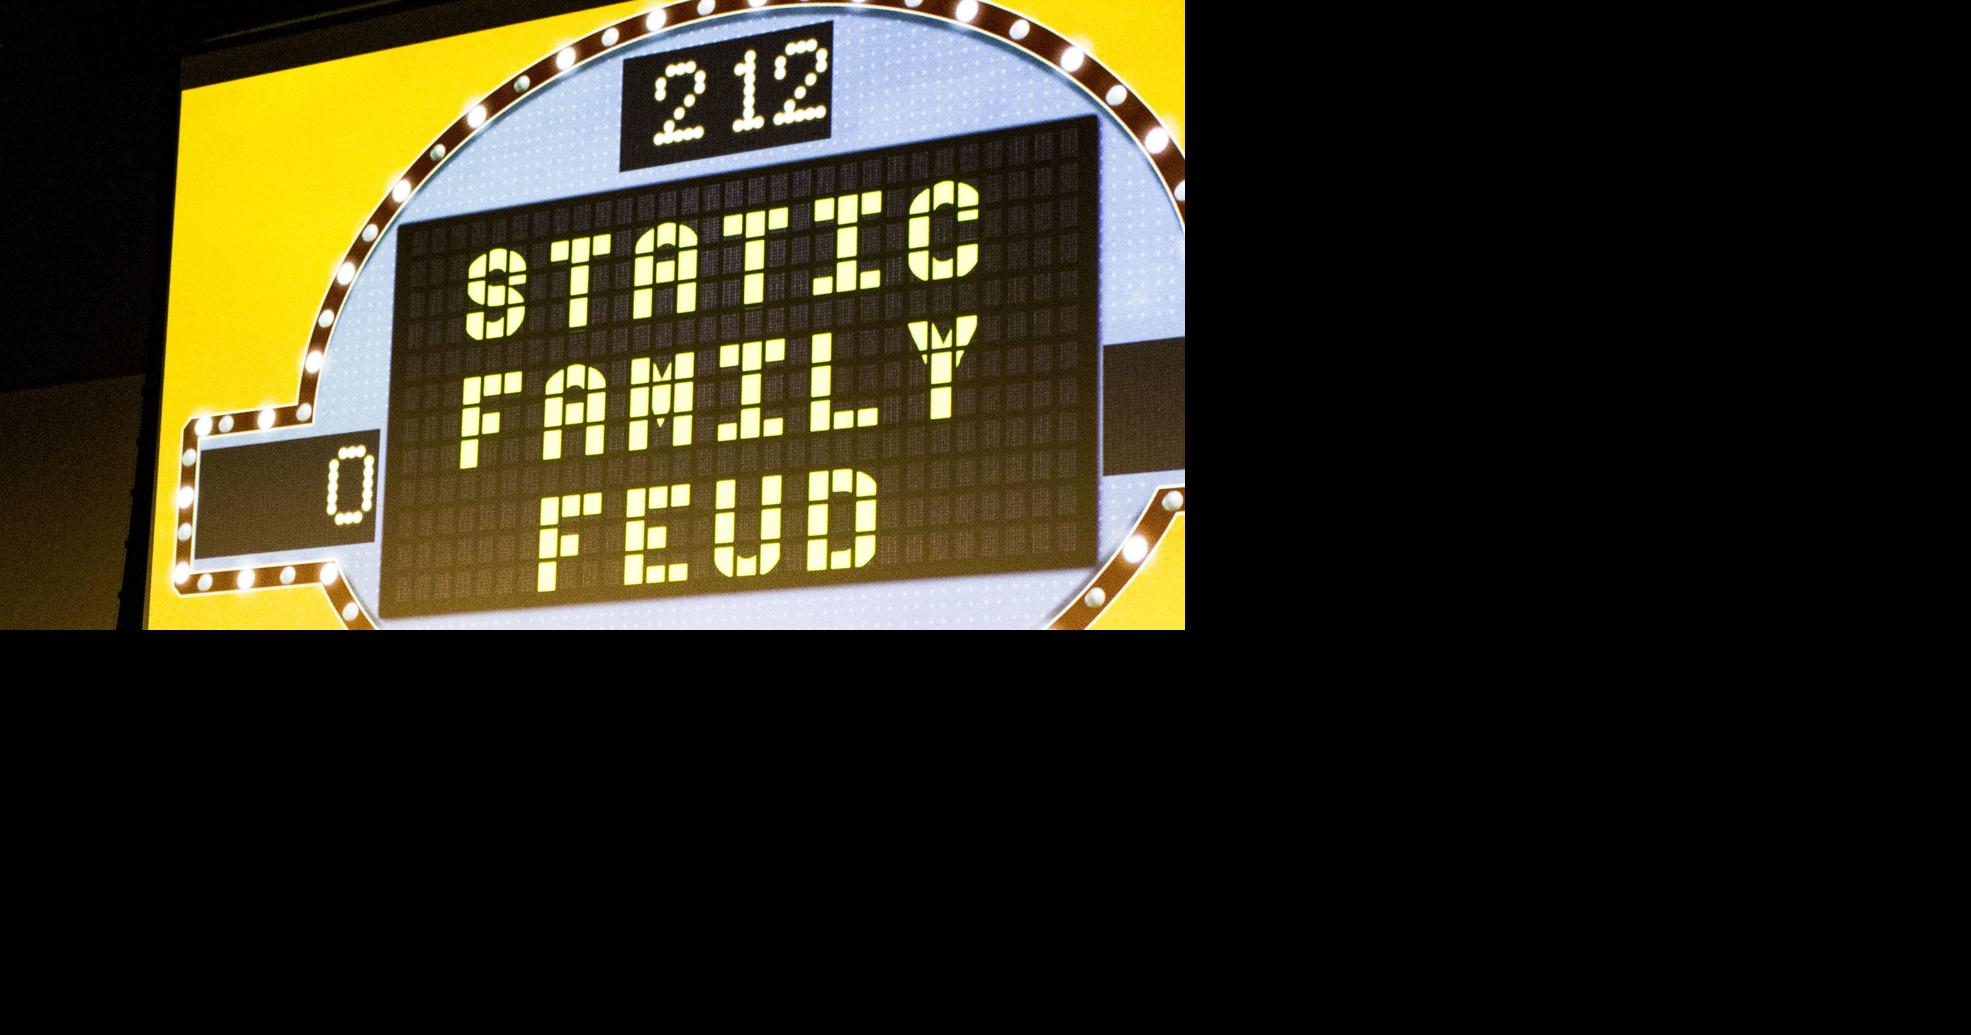 Survey says, IUP Family Feud has successful turnout Culture